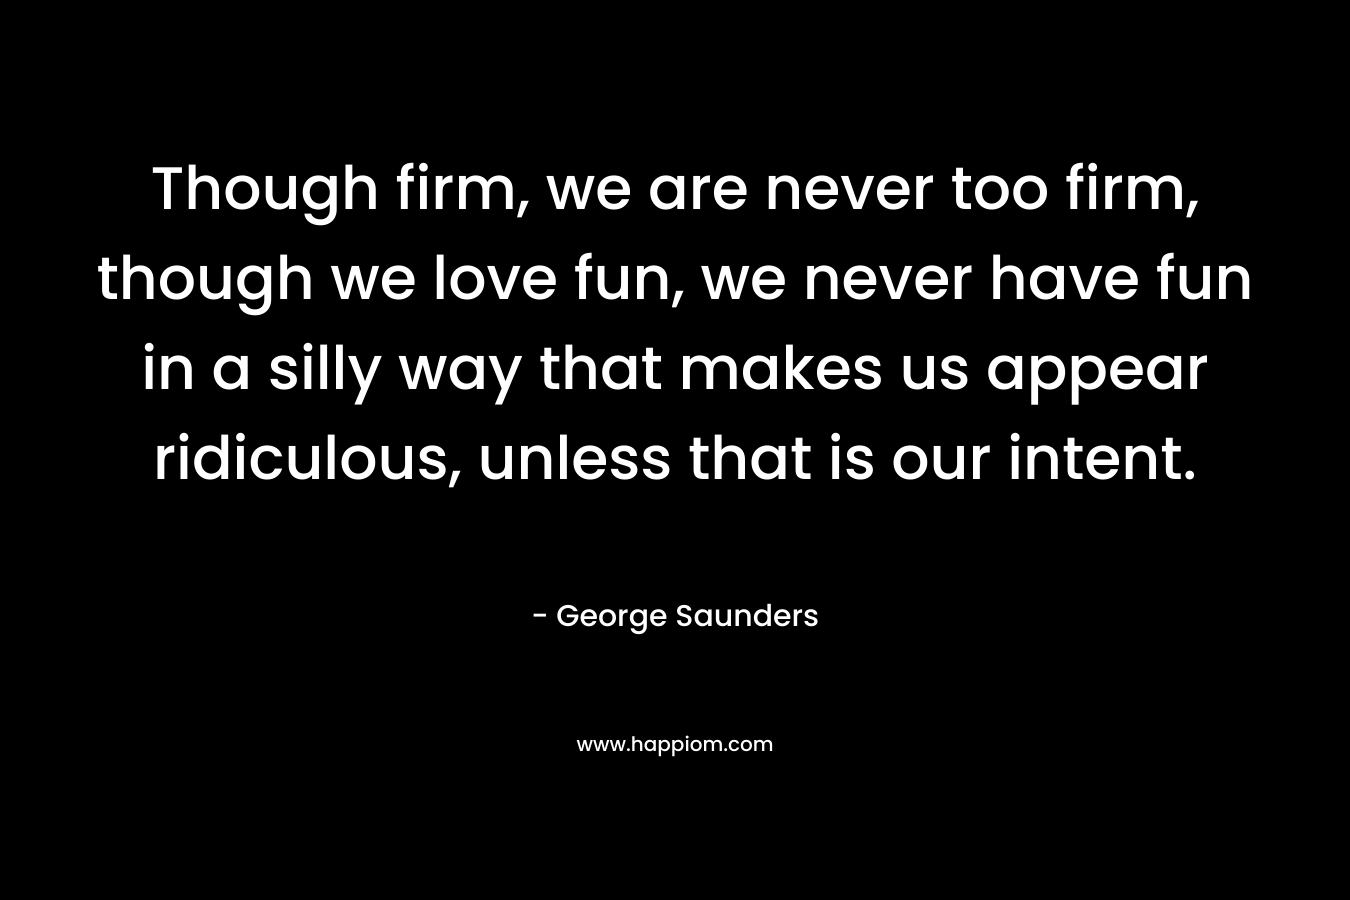 Though firm, we are never too firm, though we love fun, we never have fun in a silly way that makes us appear ridiculous, unless that is our intent. – George Saunders